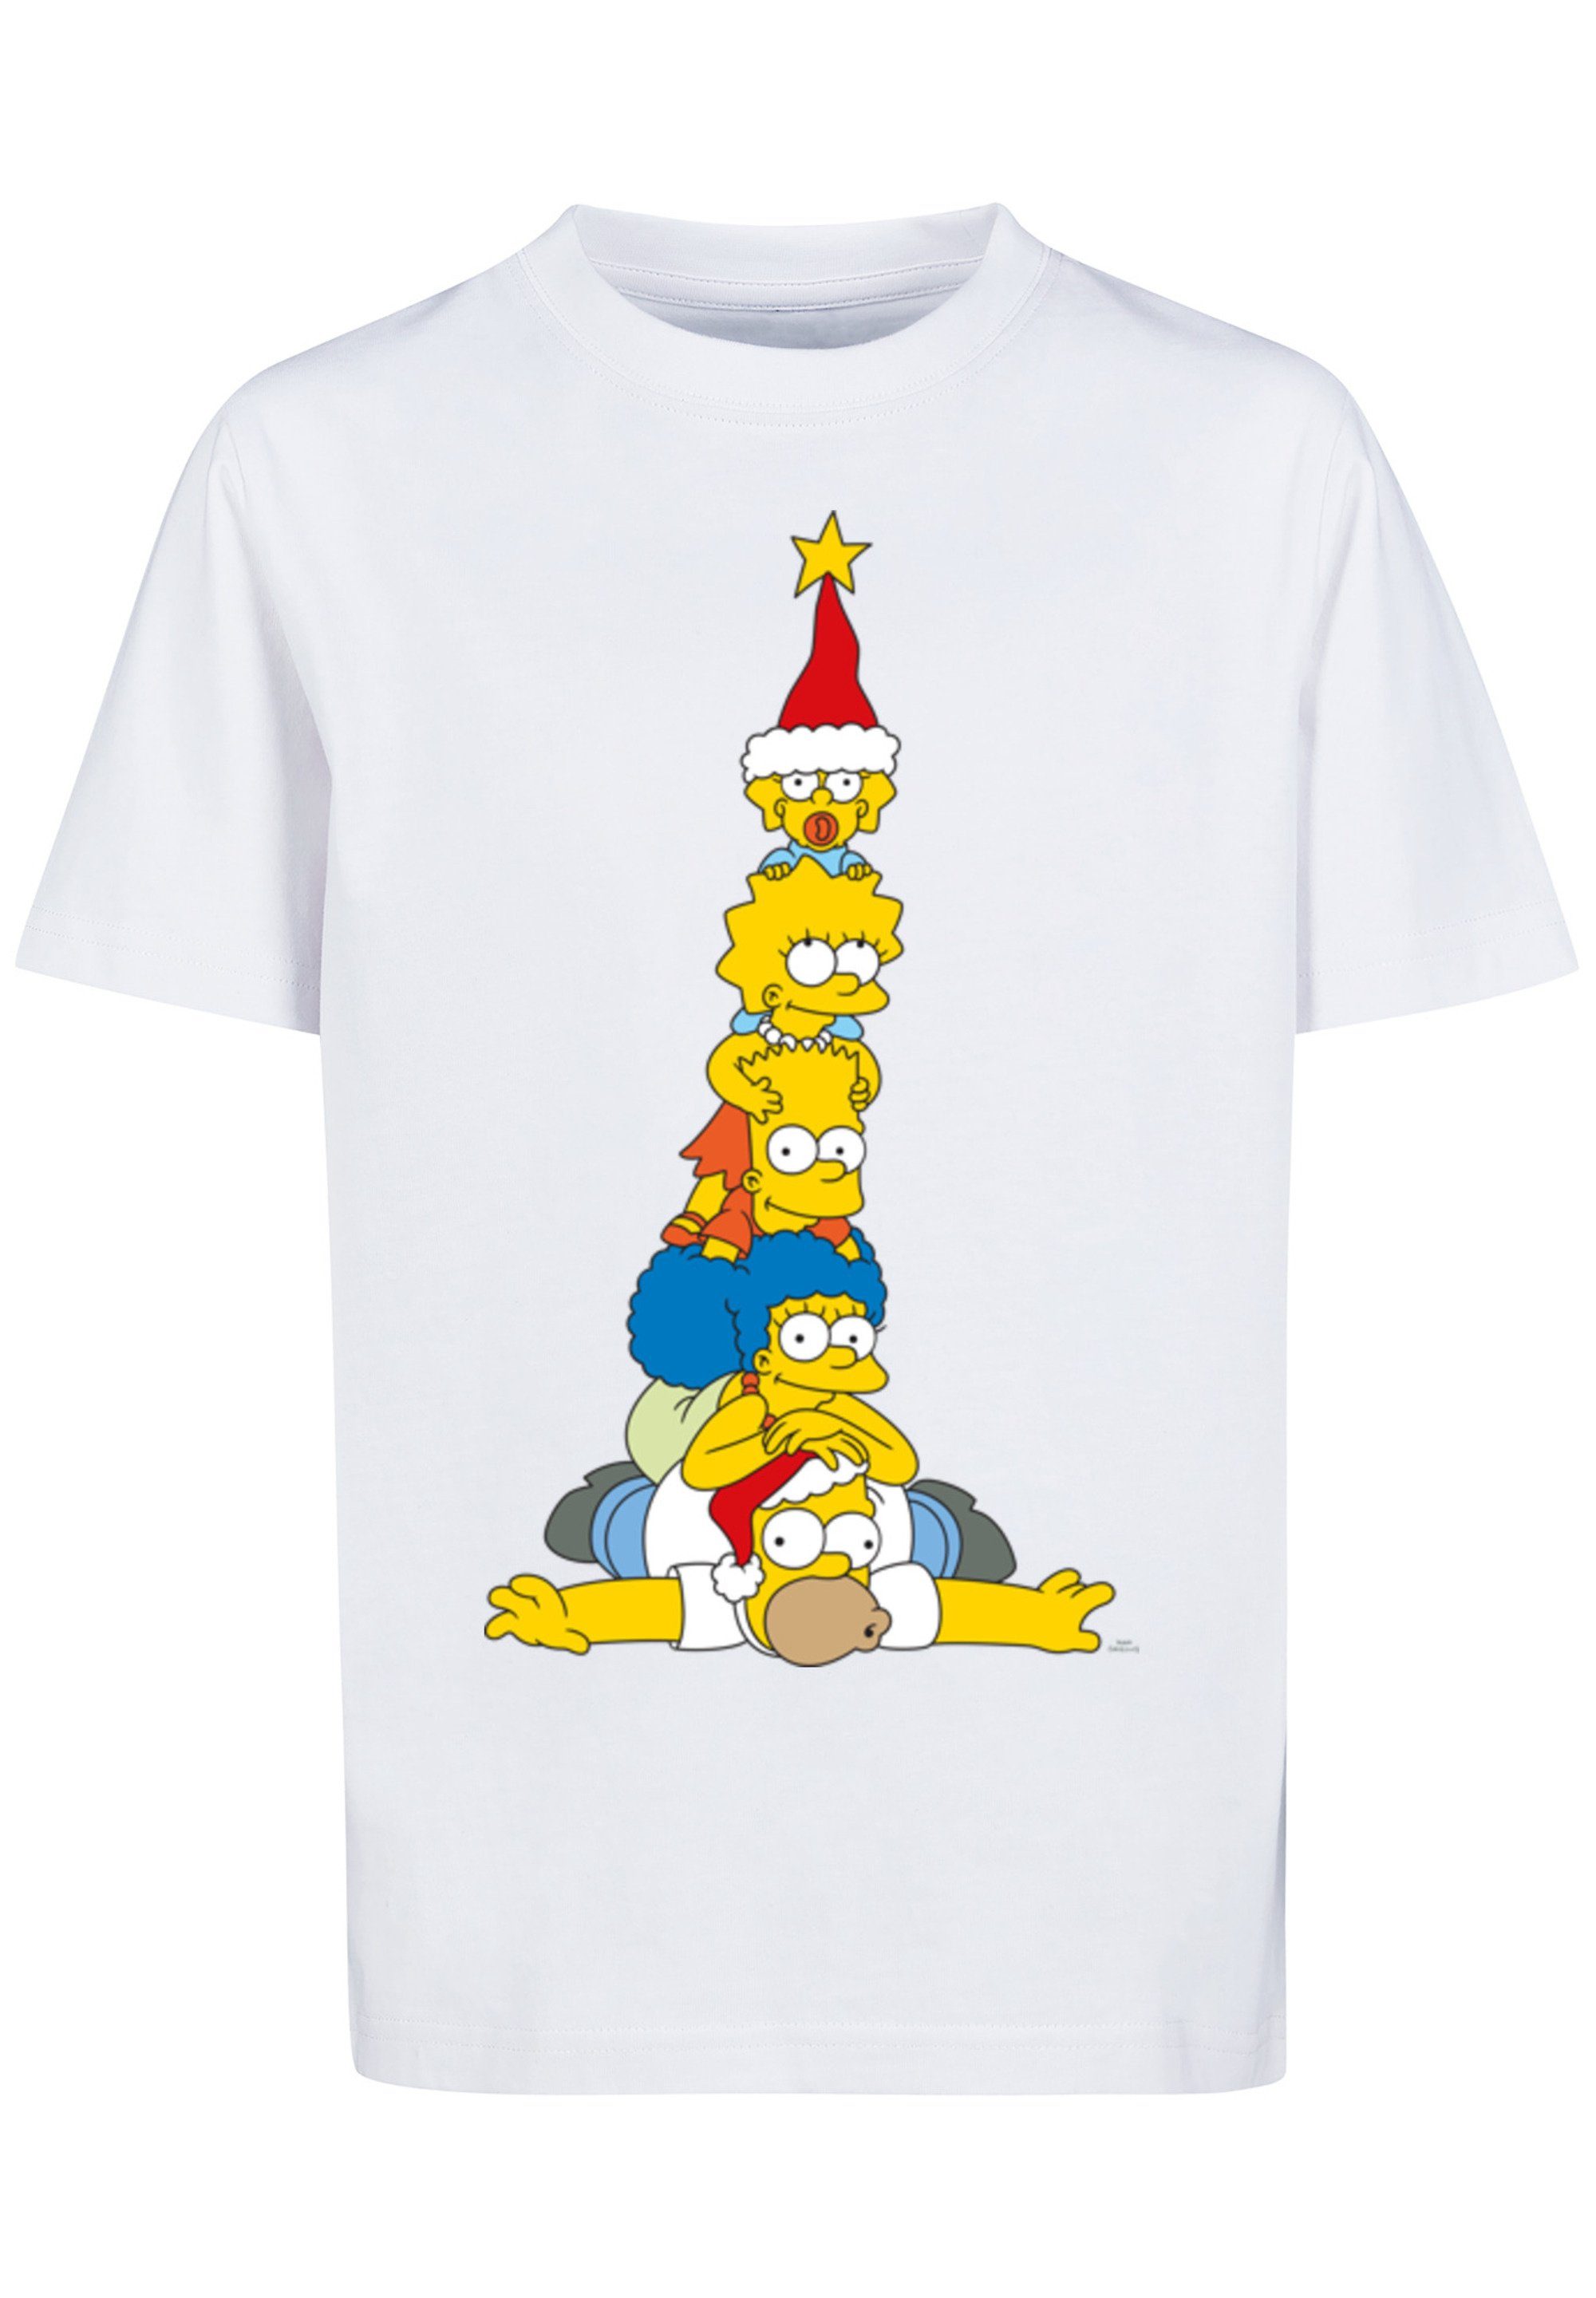 The Family Print F4NT4STIC Weihnachtsbaum Christmas T-Shirt Simpsons weiß